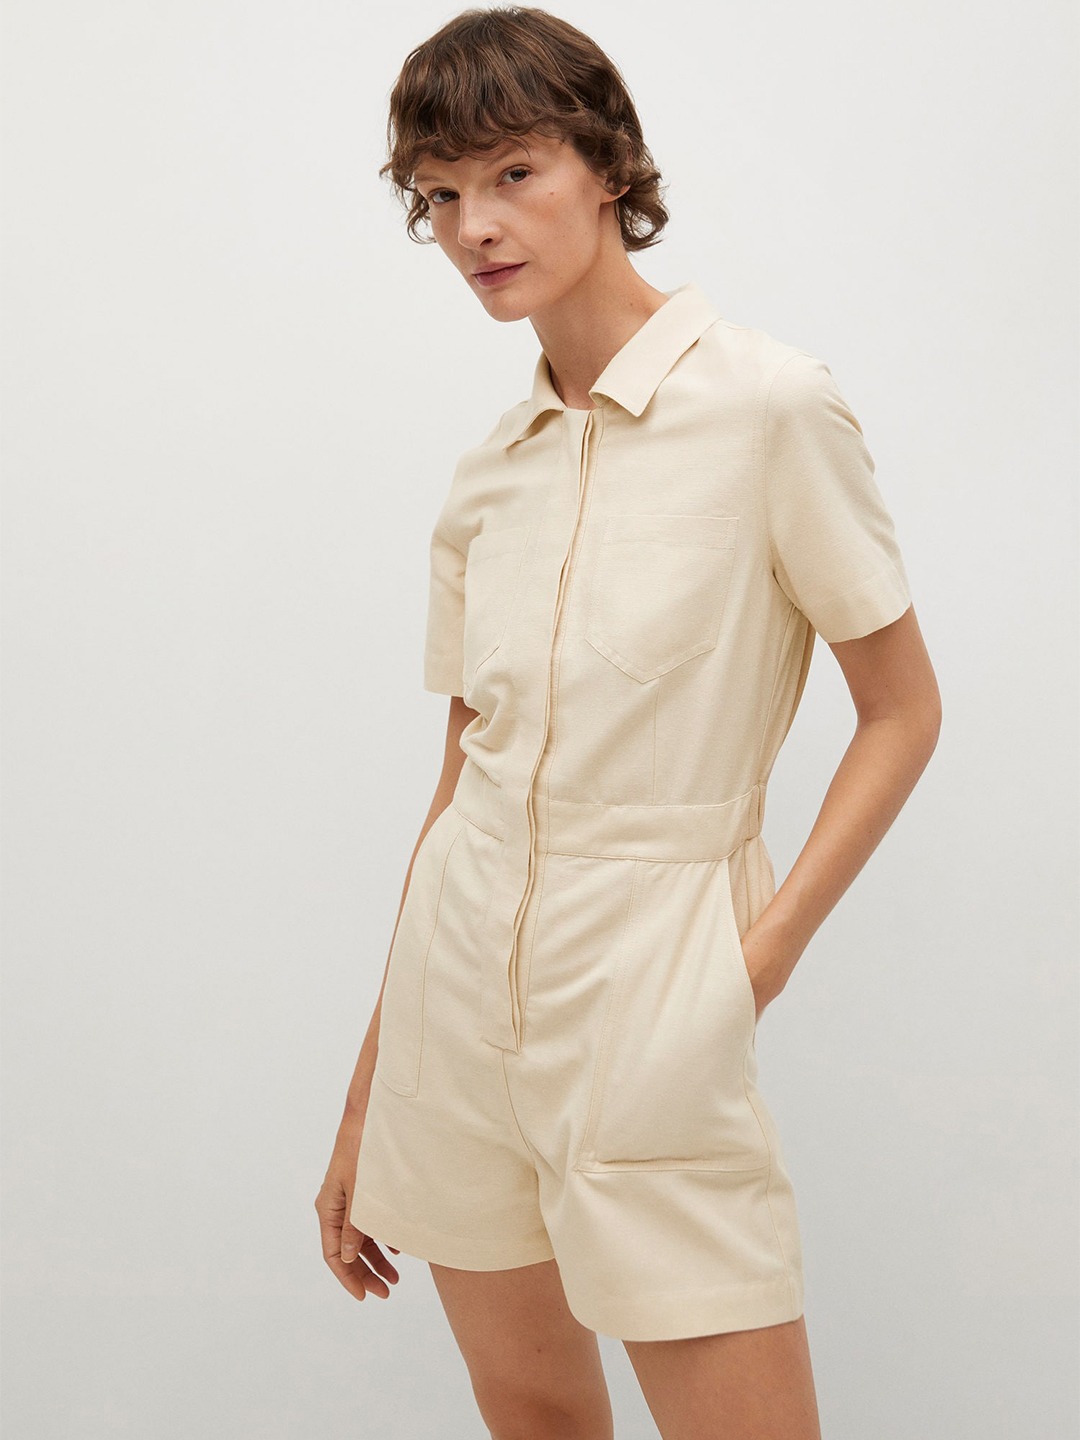 Clothing Jumpsuit | MANGO Women Off-White Solid Shirt Collar Playsuit - FG28535